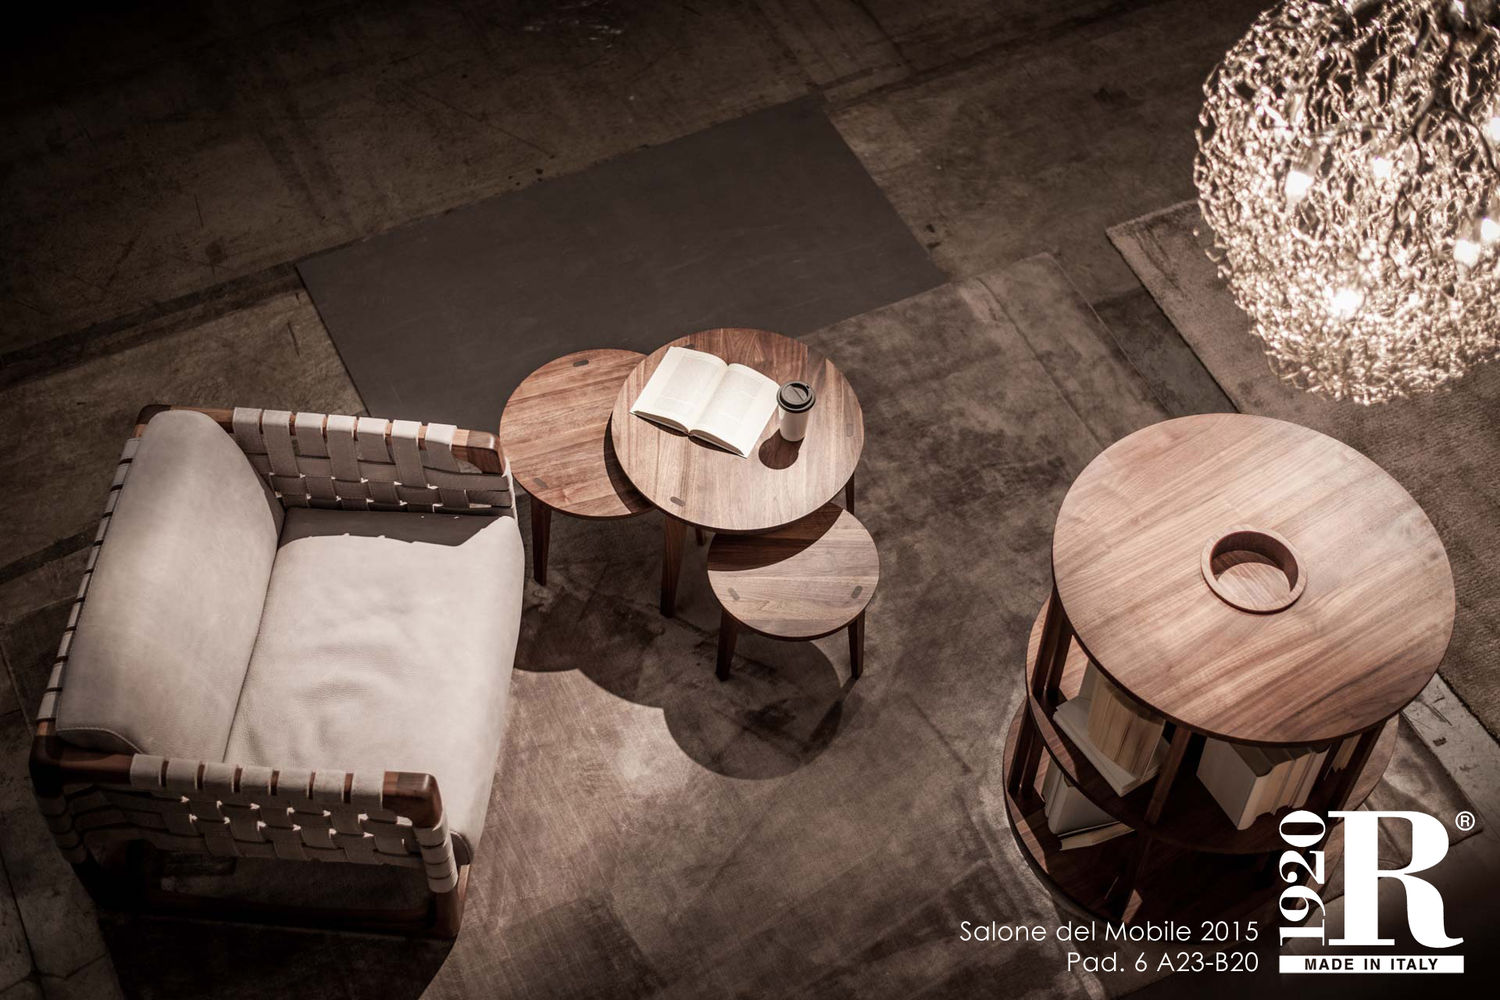 Scm Group celebrates with Riva 1920 its 95 years of success, sponsoring the Milan Furniture Show  (Salone del Mobile 2015)